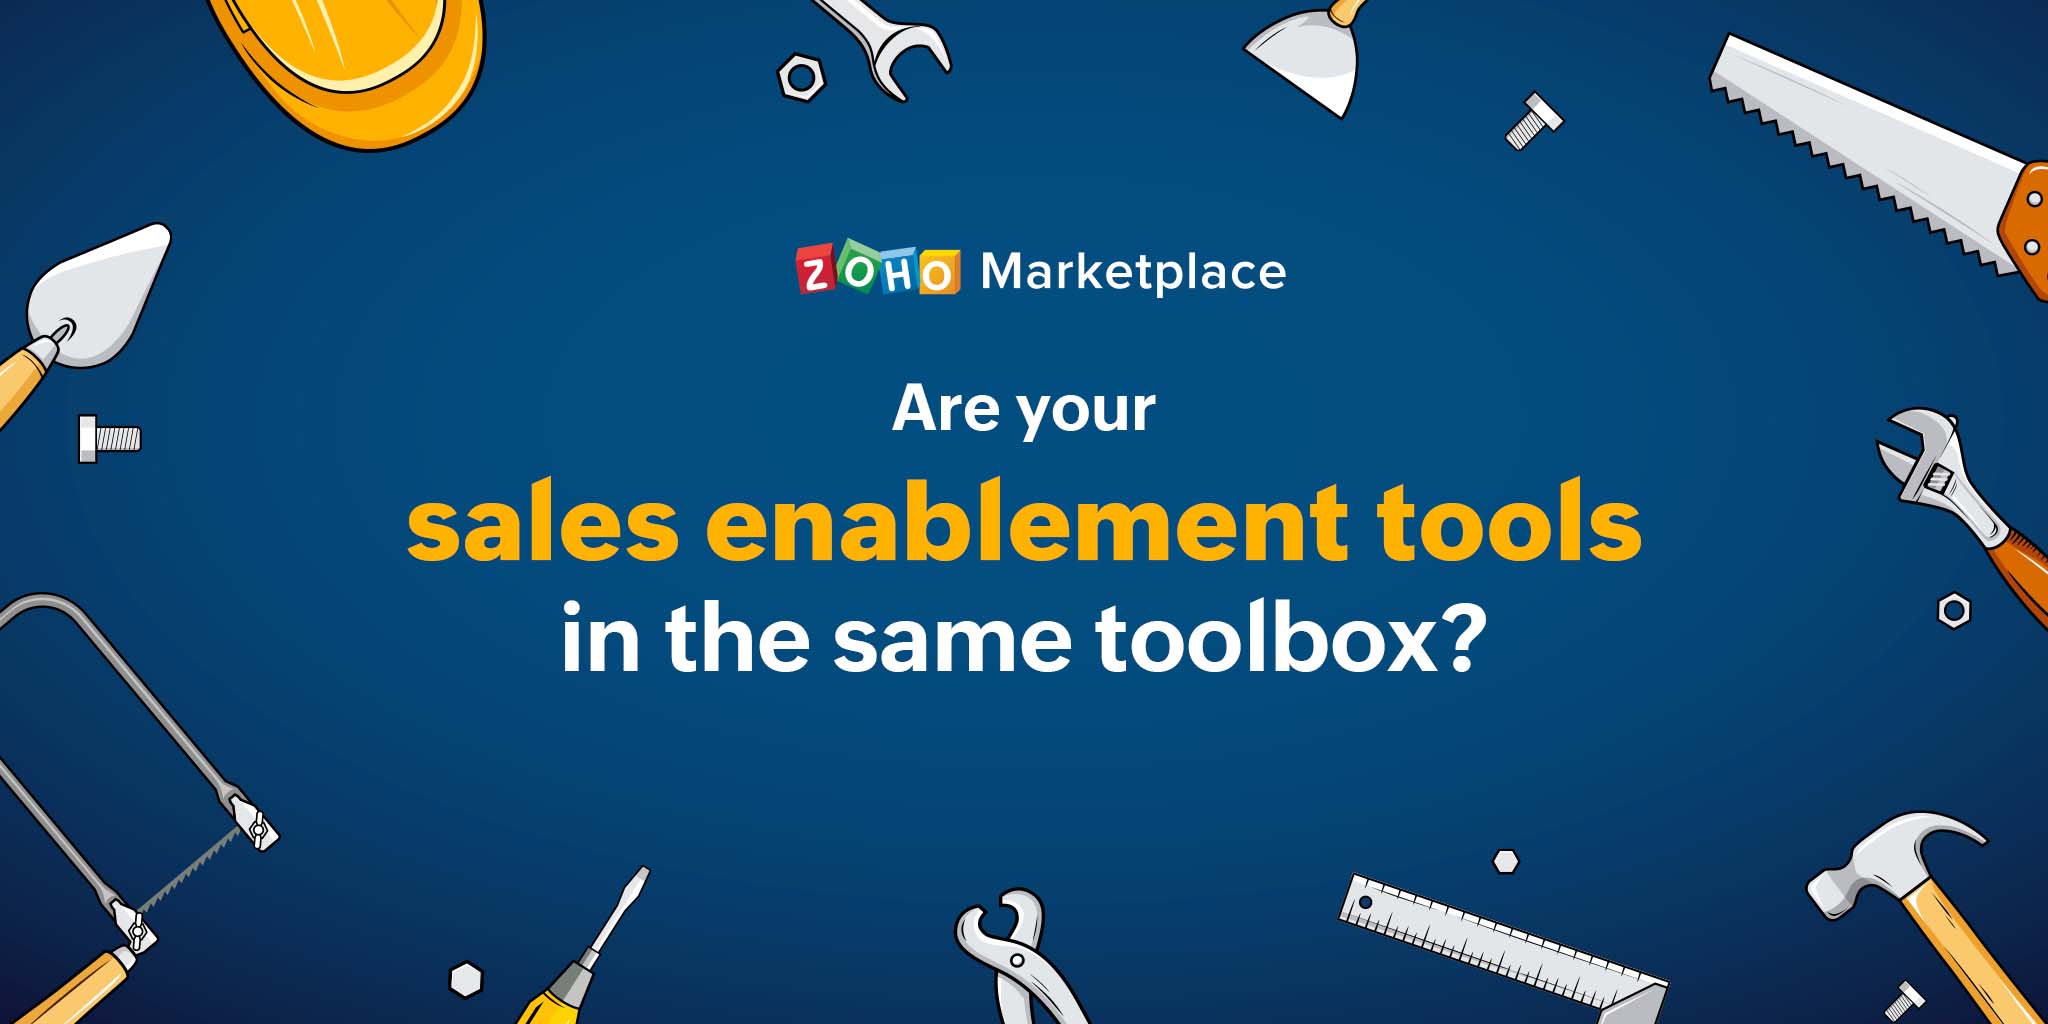 Are your sales enablement tools in the same toolbox?